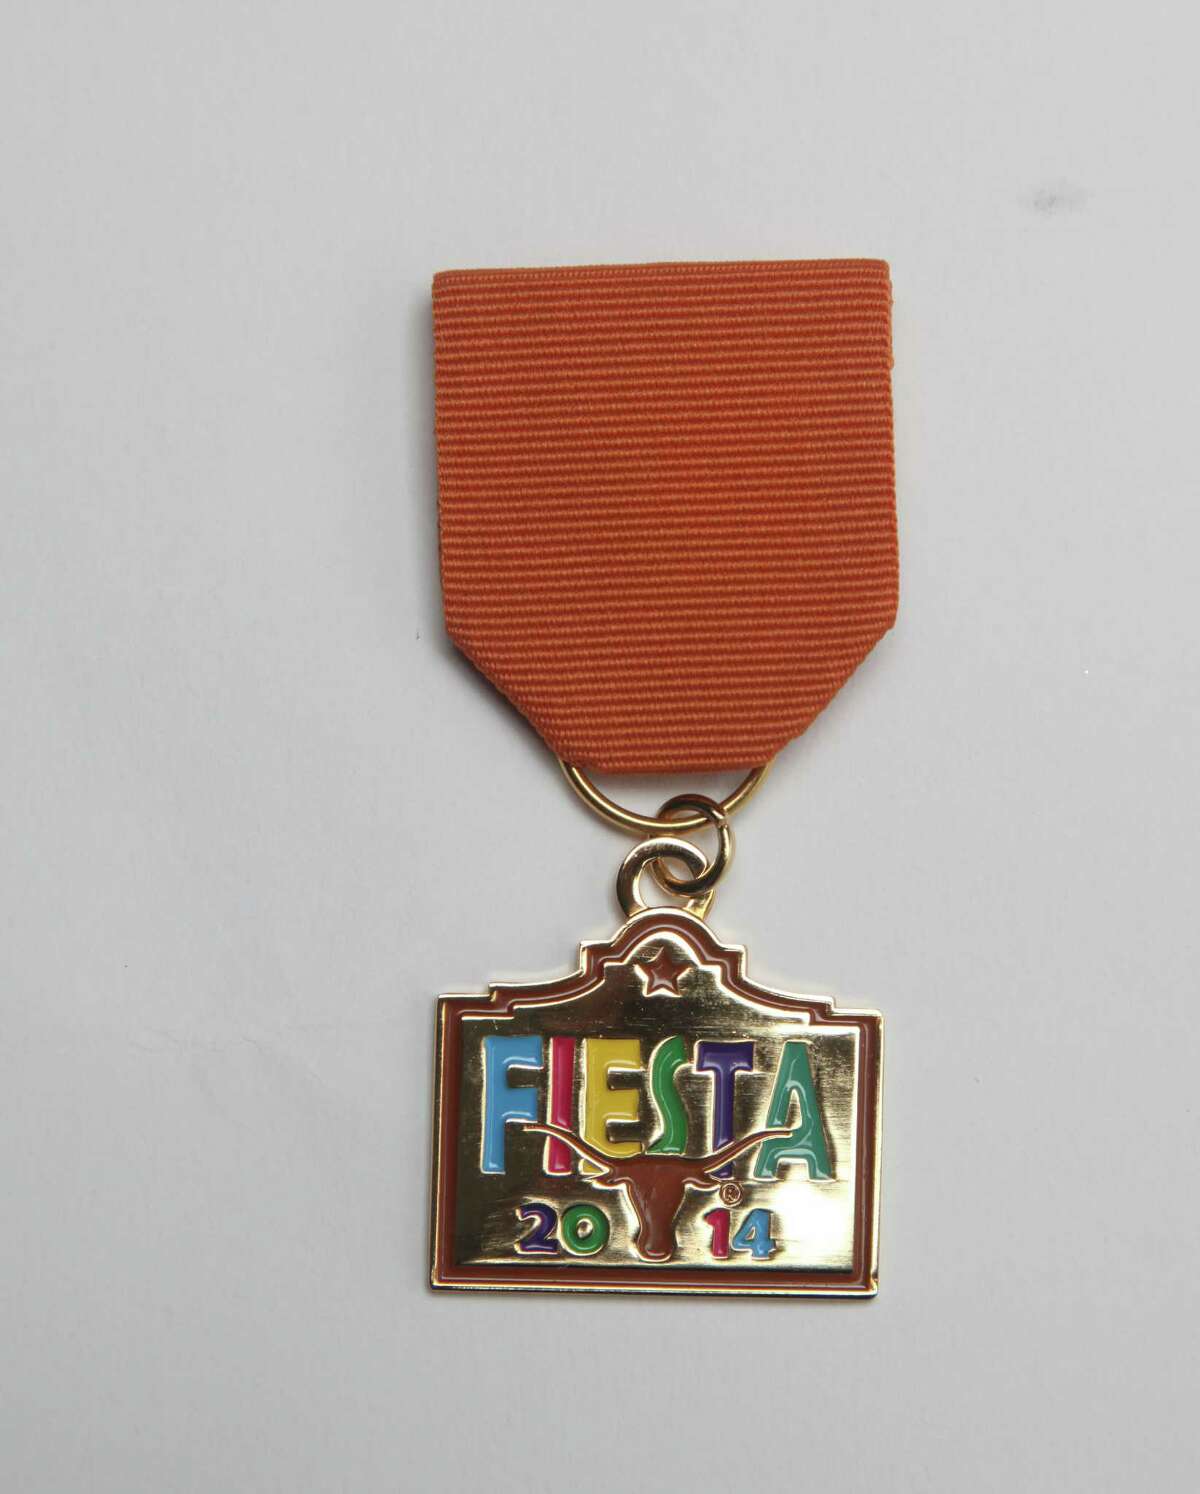 Fiesta medal craze growing — and morphing